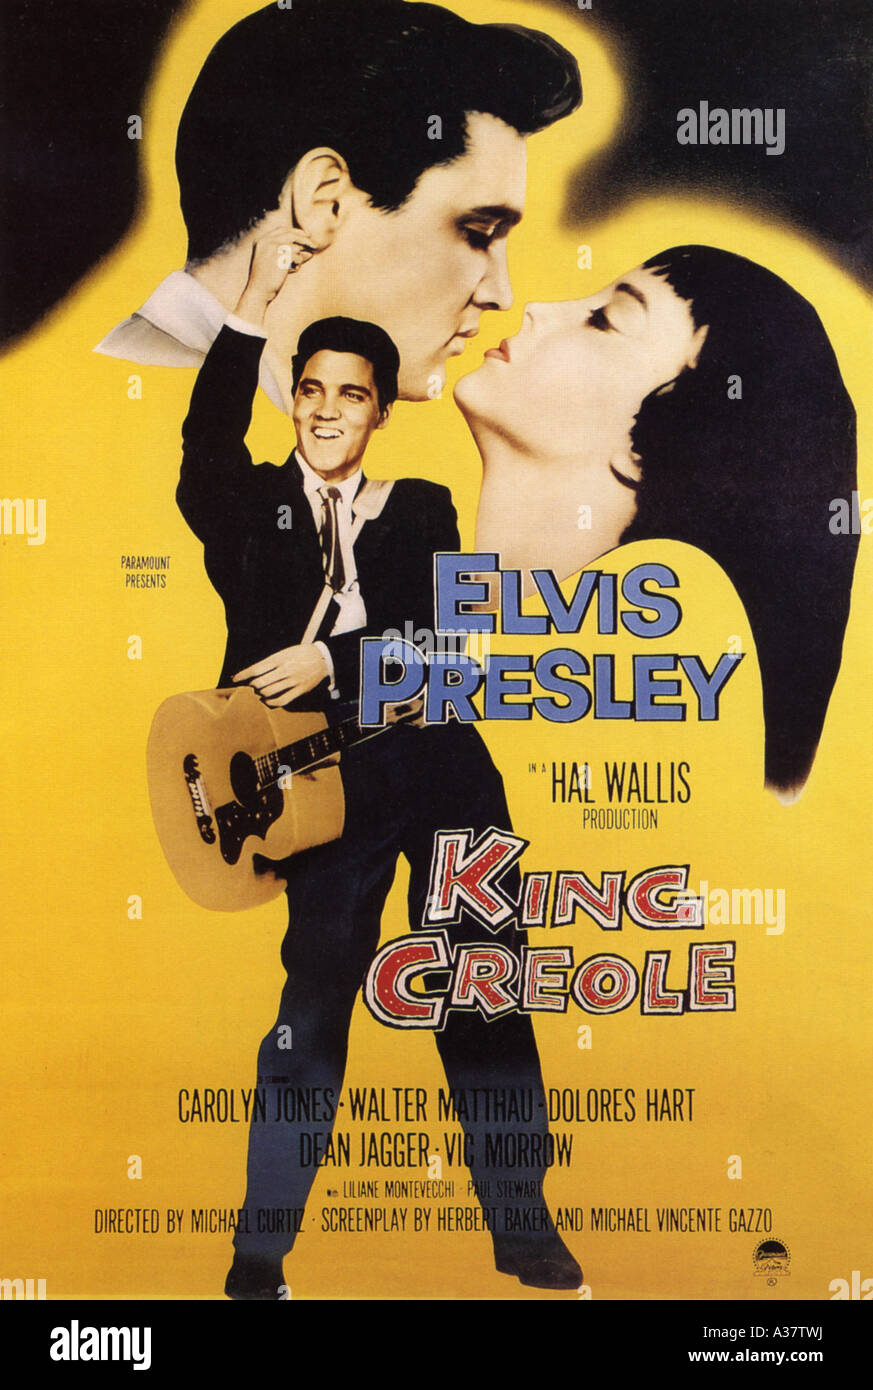 KING CREOLE poster for 1958 Paramount film with Elvis Presley and Carolyn Jones Stock Photo